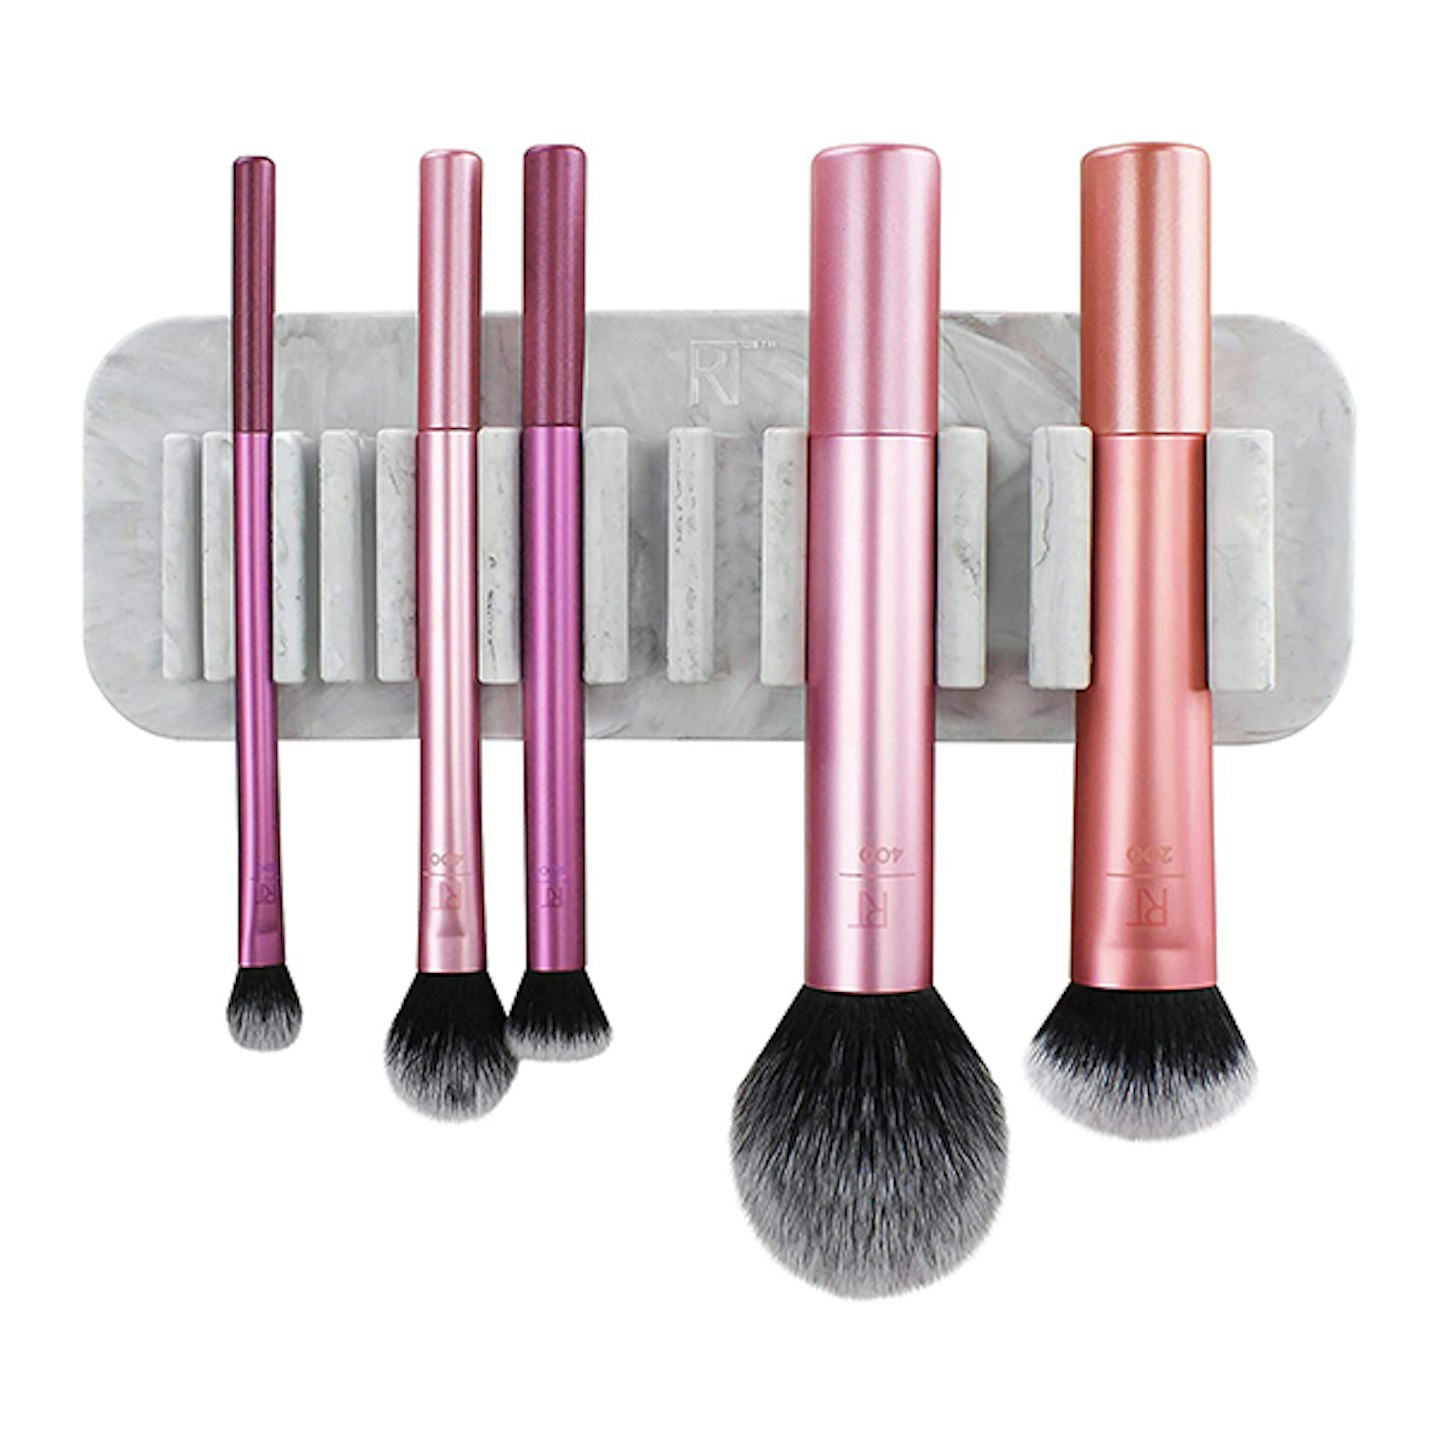 Real Techniques Stick and Store Makeup Brush Organiser Storage Drying Rack